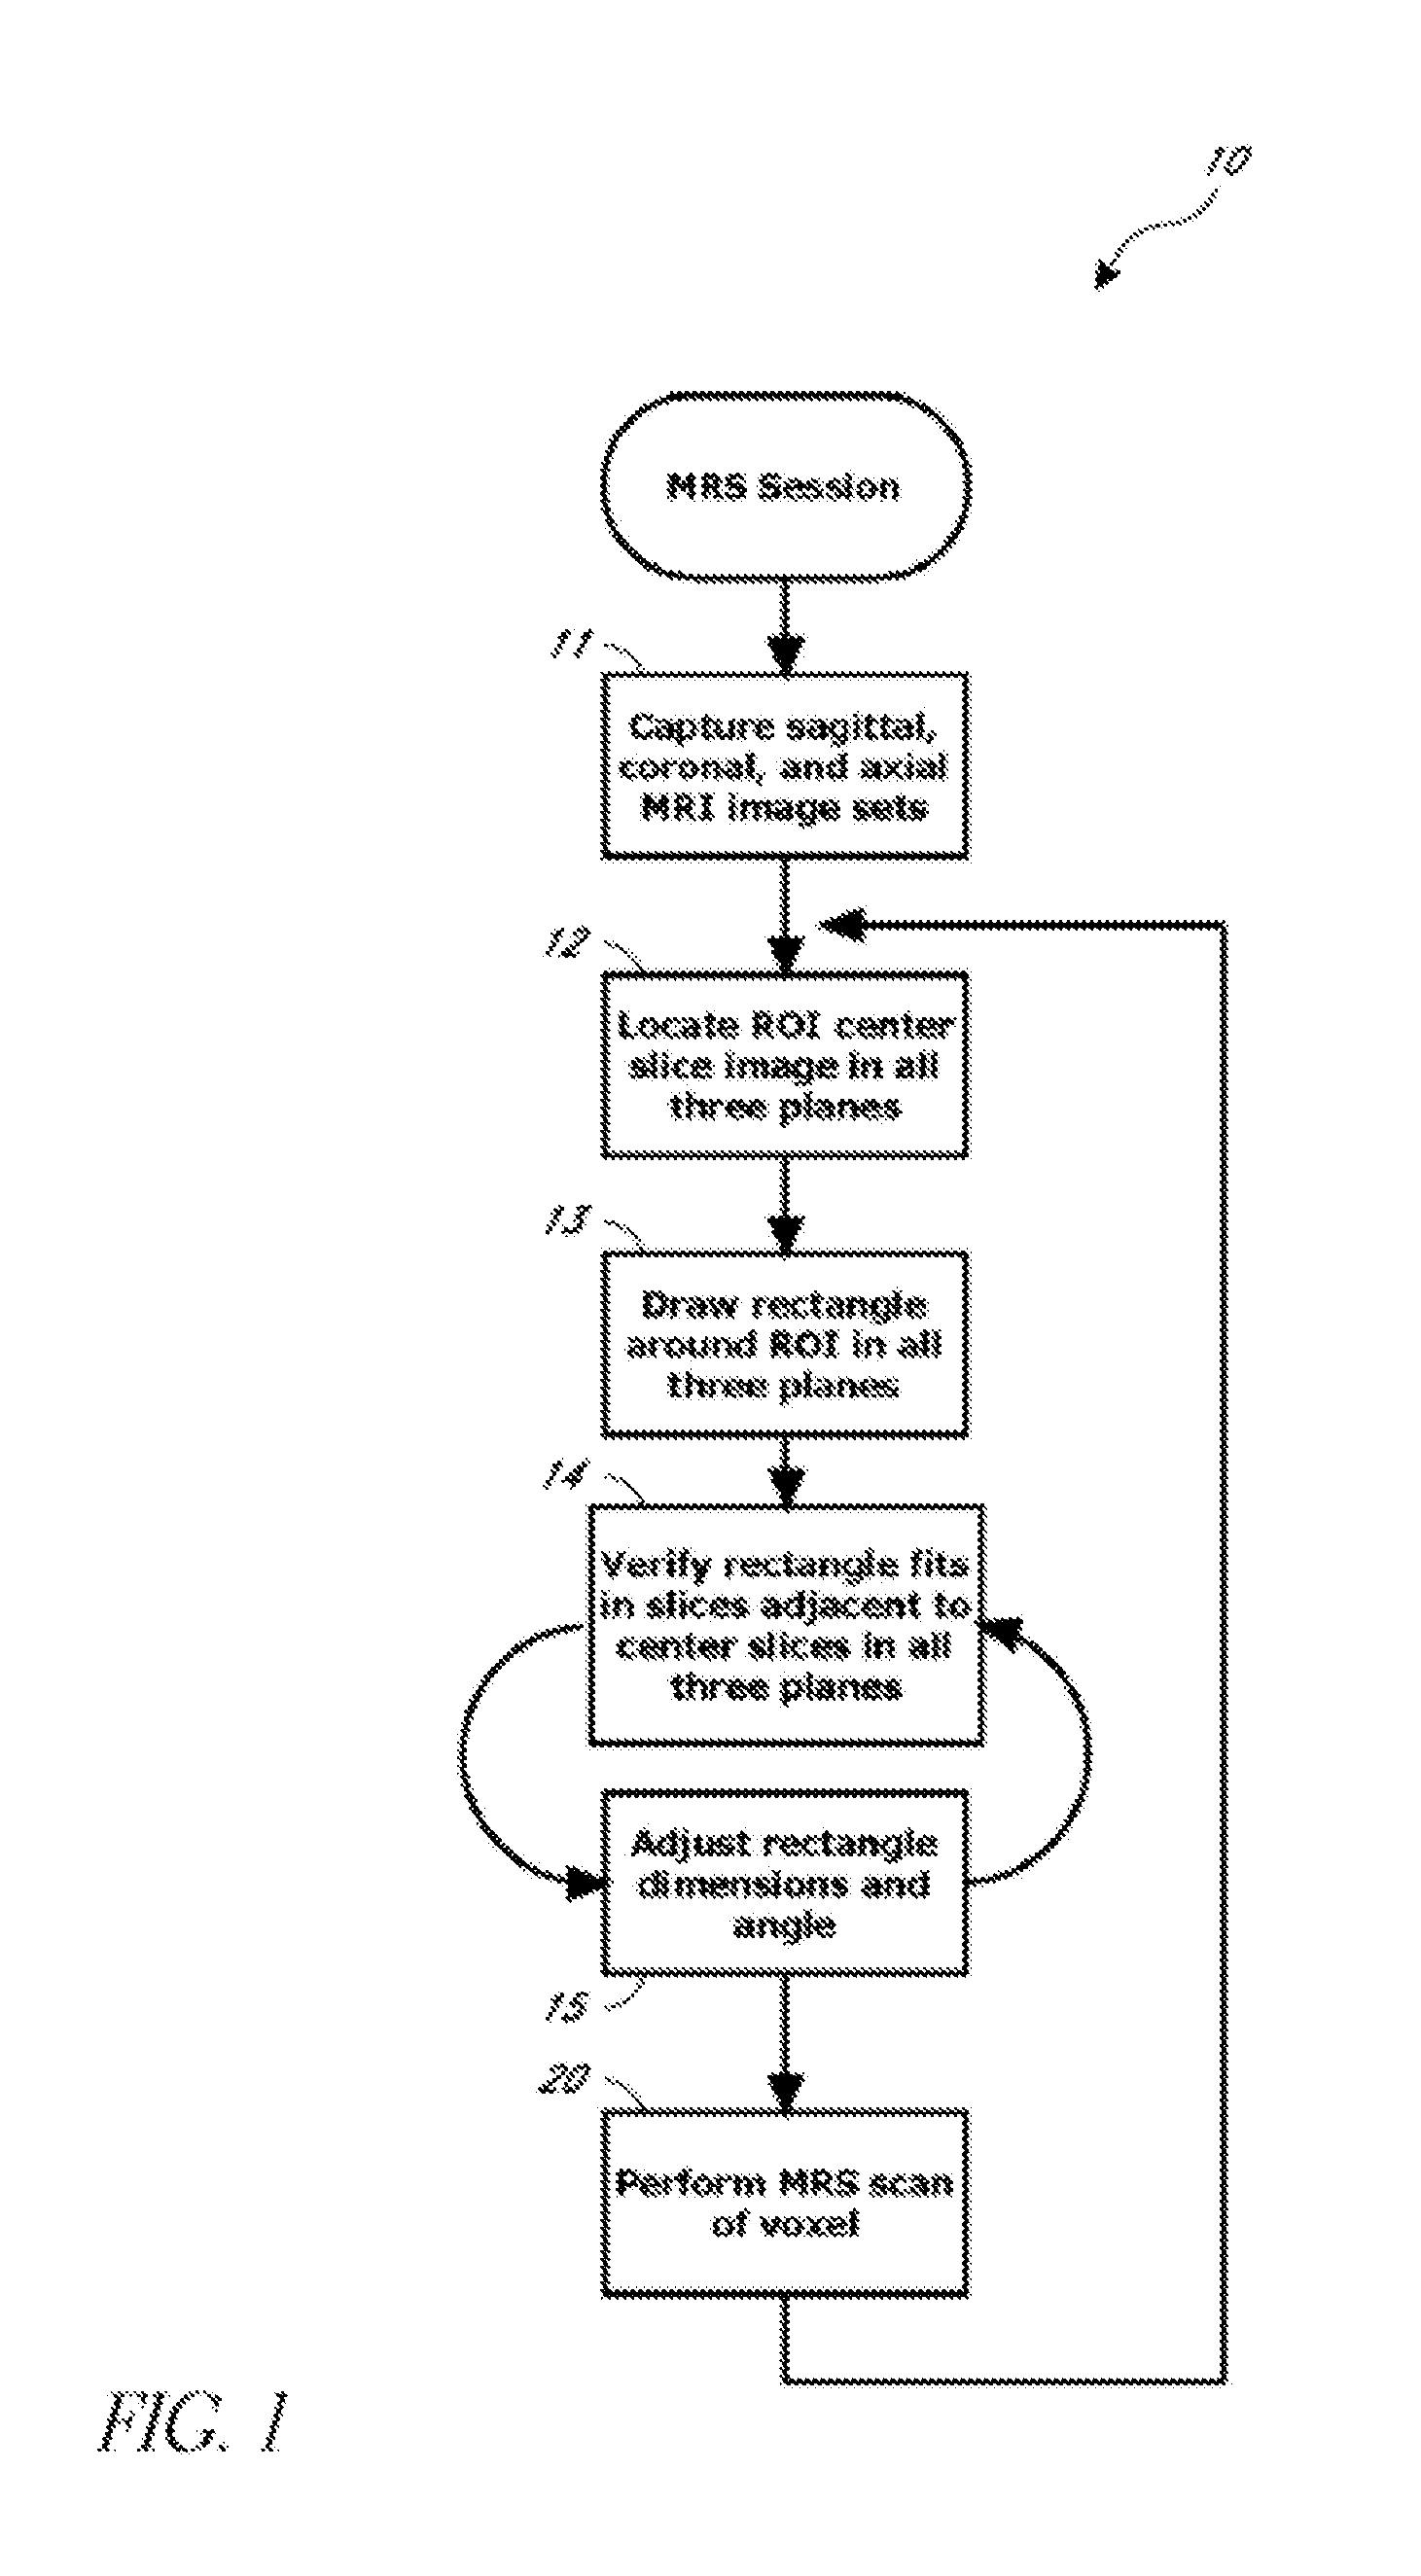 Systems and methods for automated voxelation of regions of interest for magnetic resonance spectroscopy